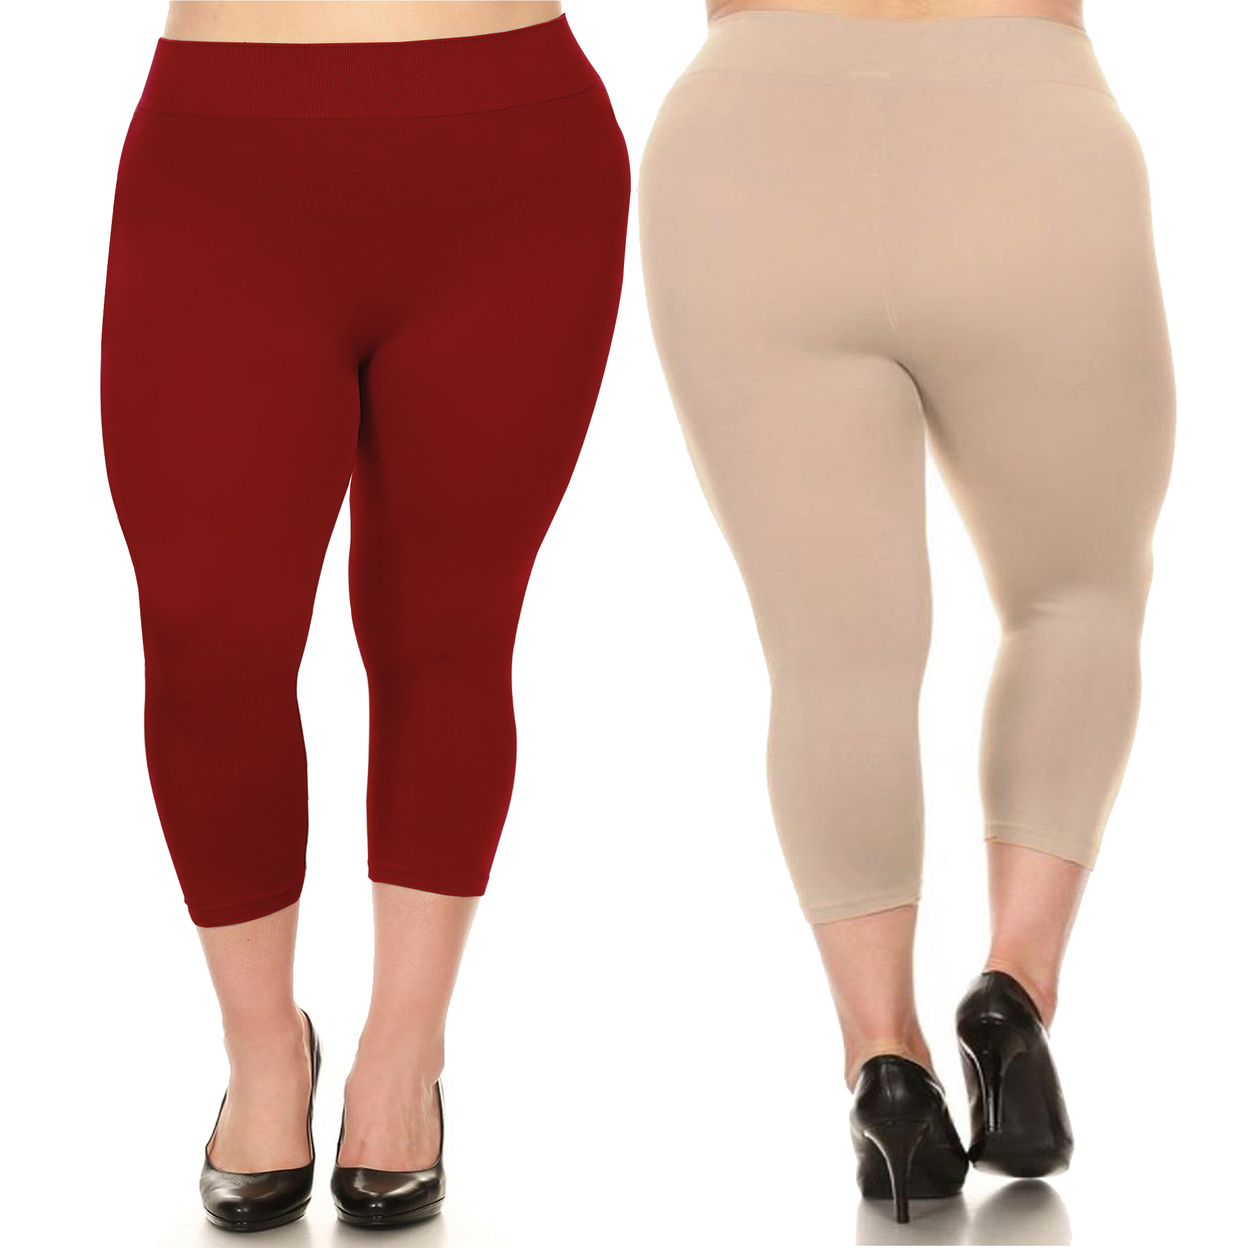 2-Pack: Women's Ultra-Soft High Waisted Smooth Stretch Active Yoga Capri Leggings Plus Size Available - Red & Red, 4x